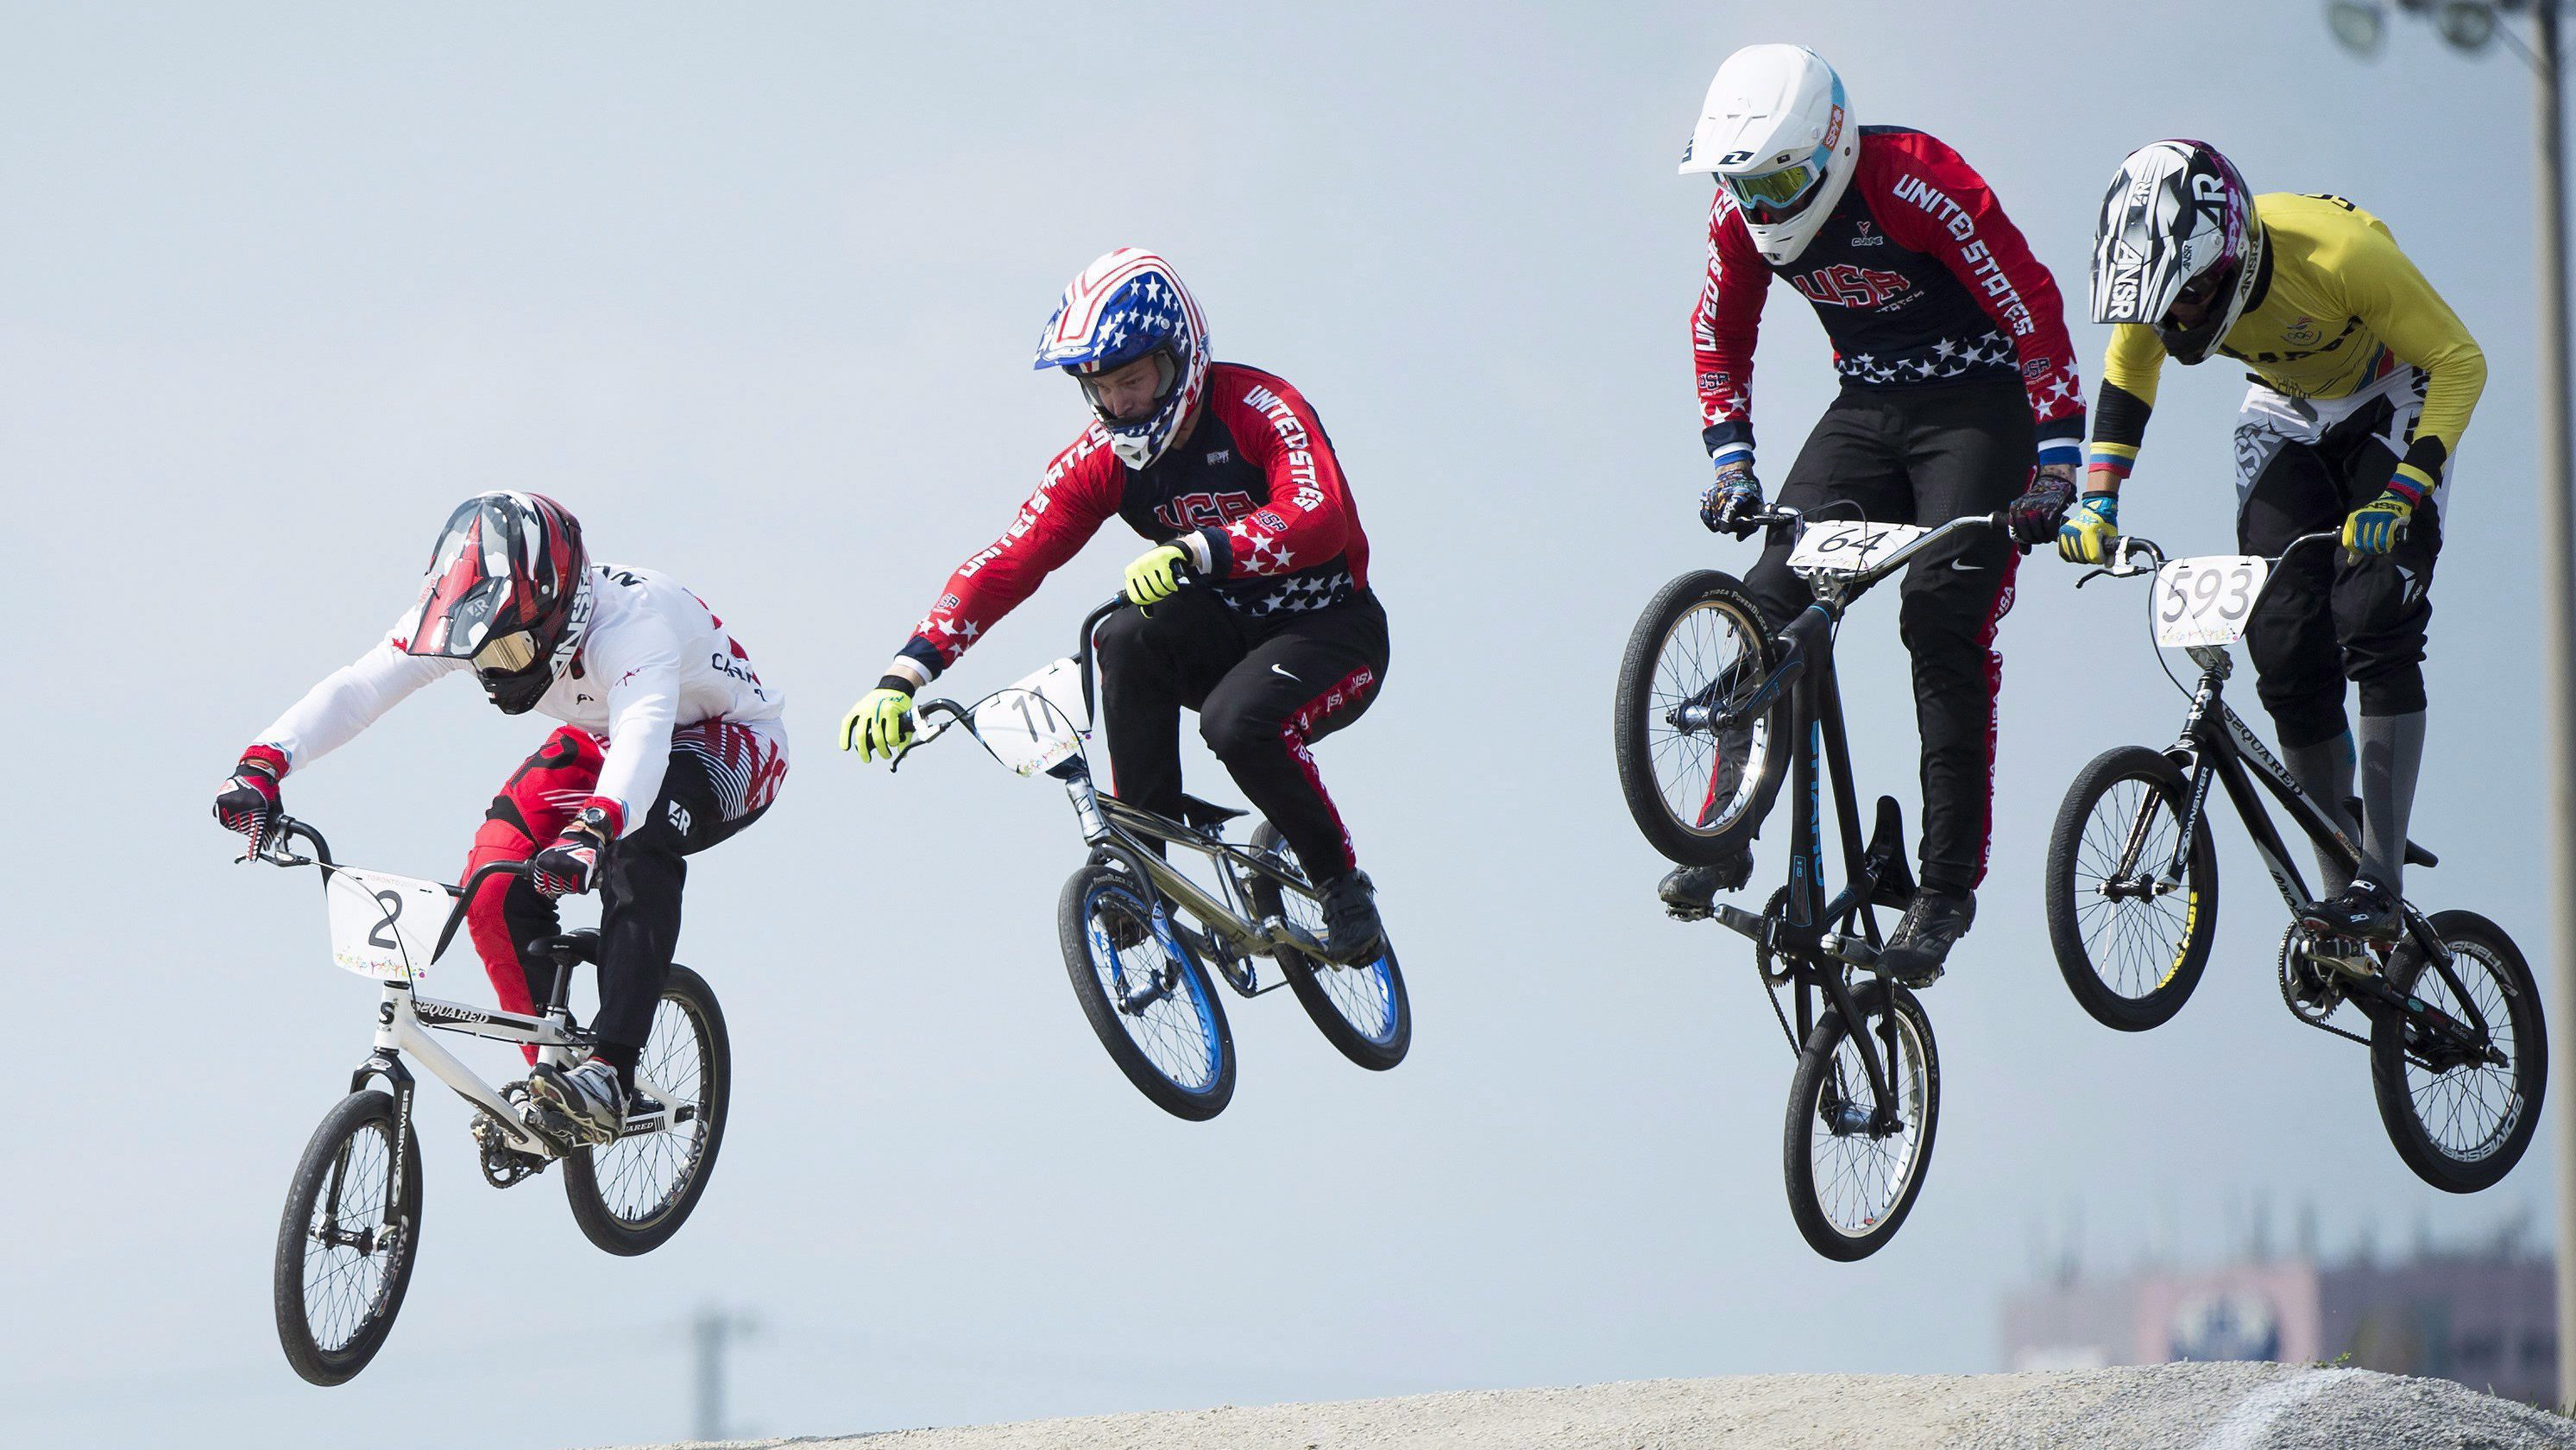 Canadian Tory Nyhaug, left, leads the pack over a jump during men's BMX finals at the Pan American Games in Toronto on Saturday, July 11, 2015. Nyhaug went on the win gold.